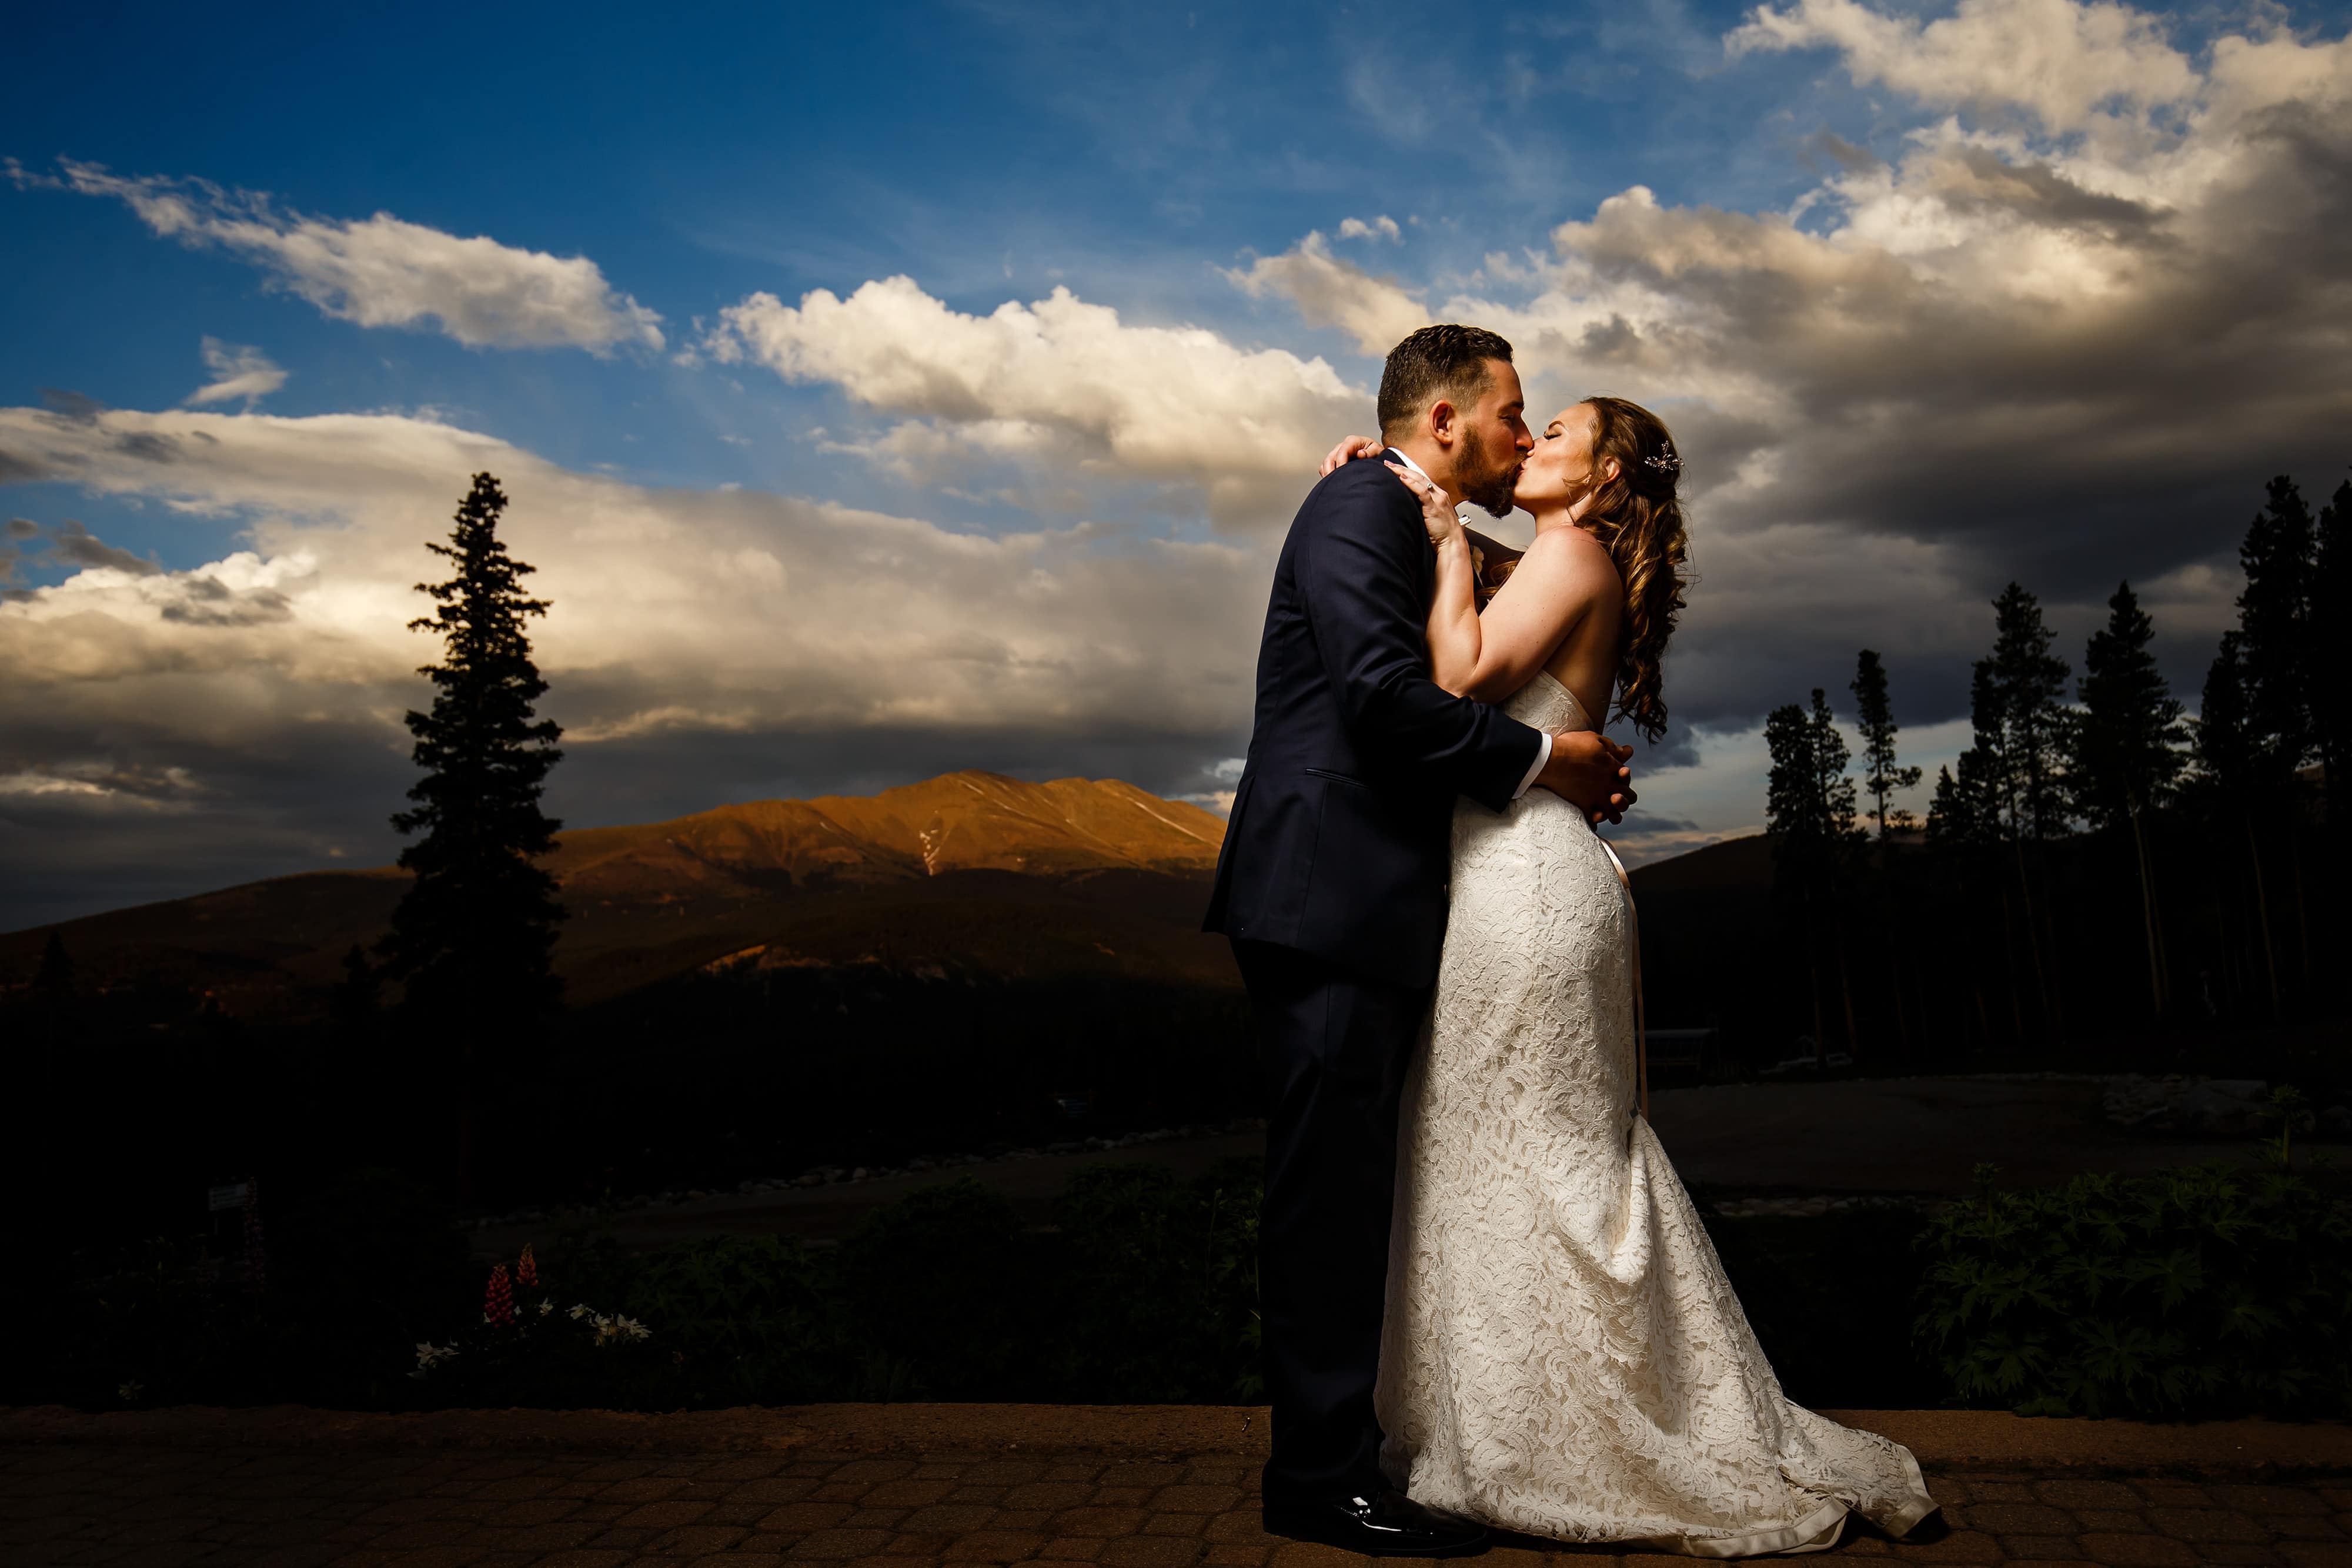 Nick and Sharon kiss and pose for a photo during sunset at TenMIle Station during their Breckenridge wedding